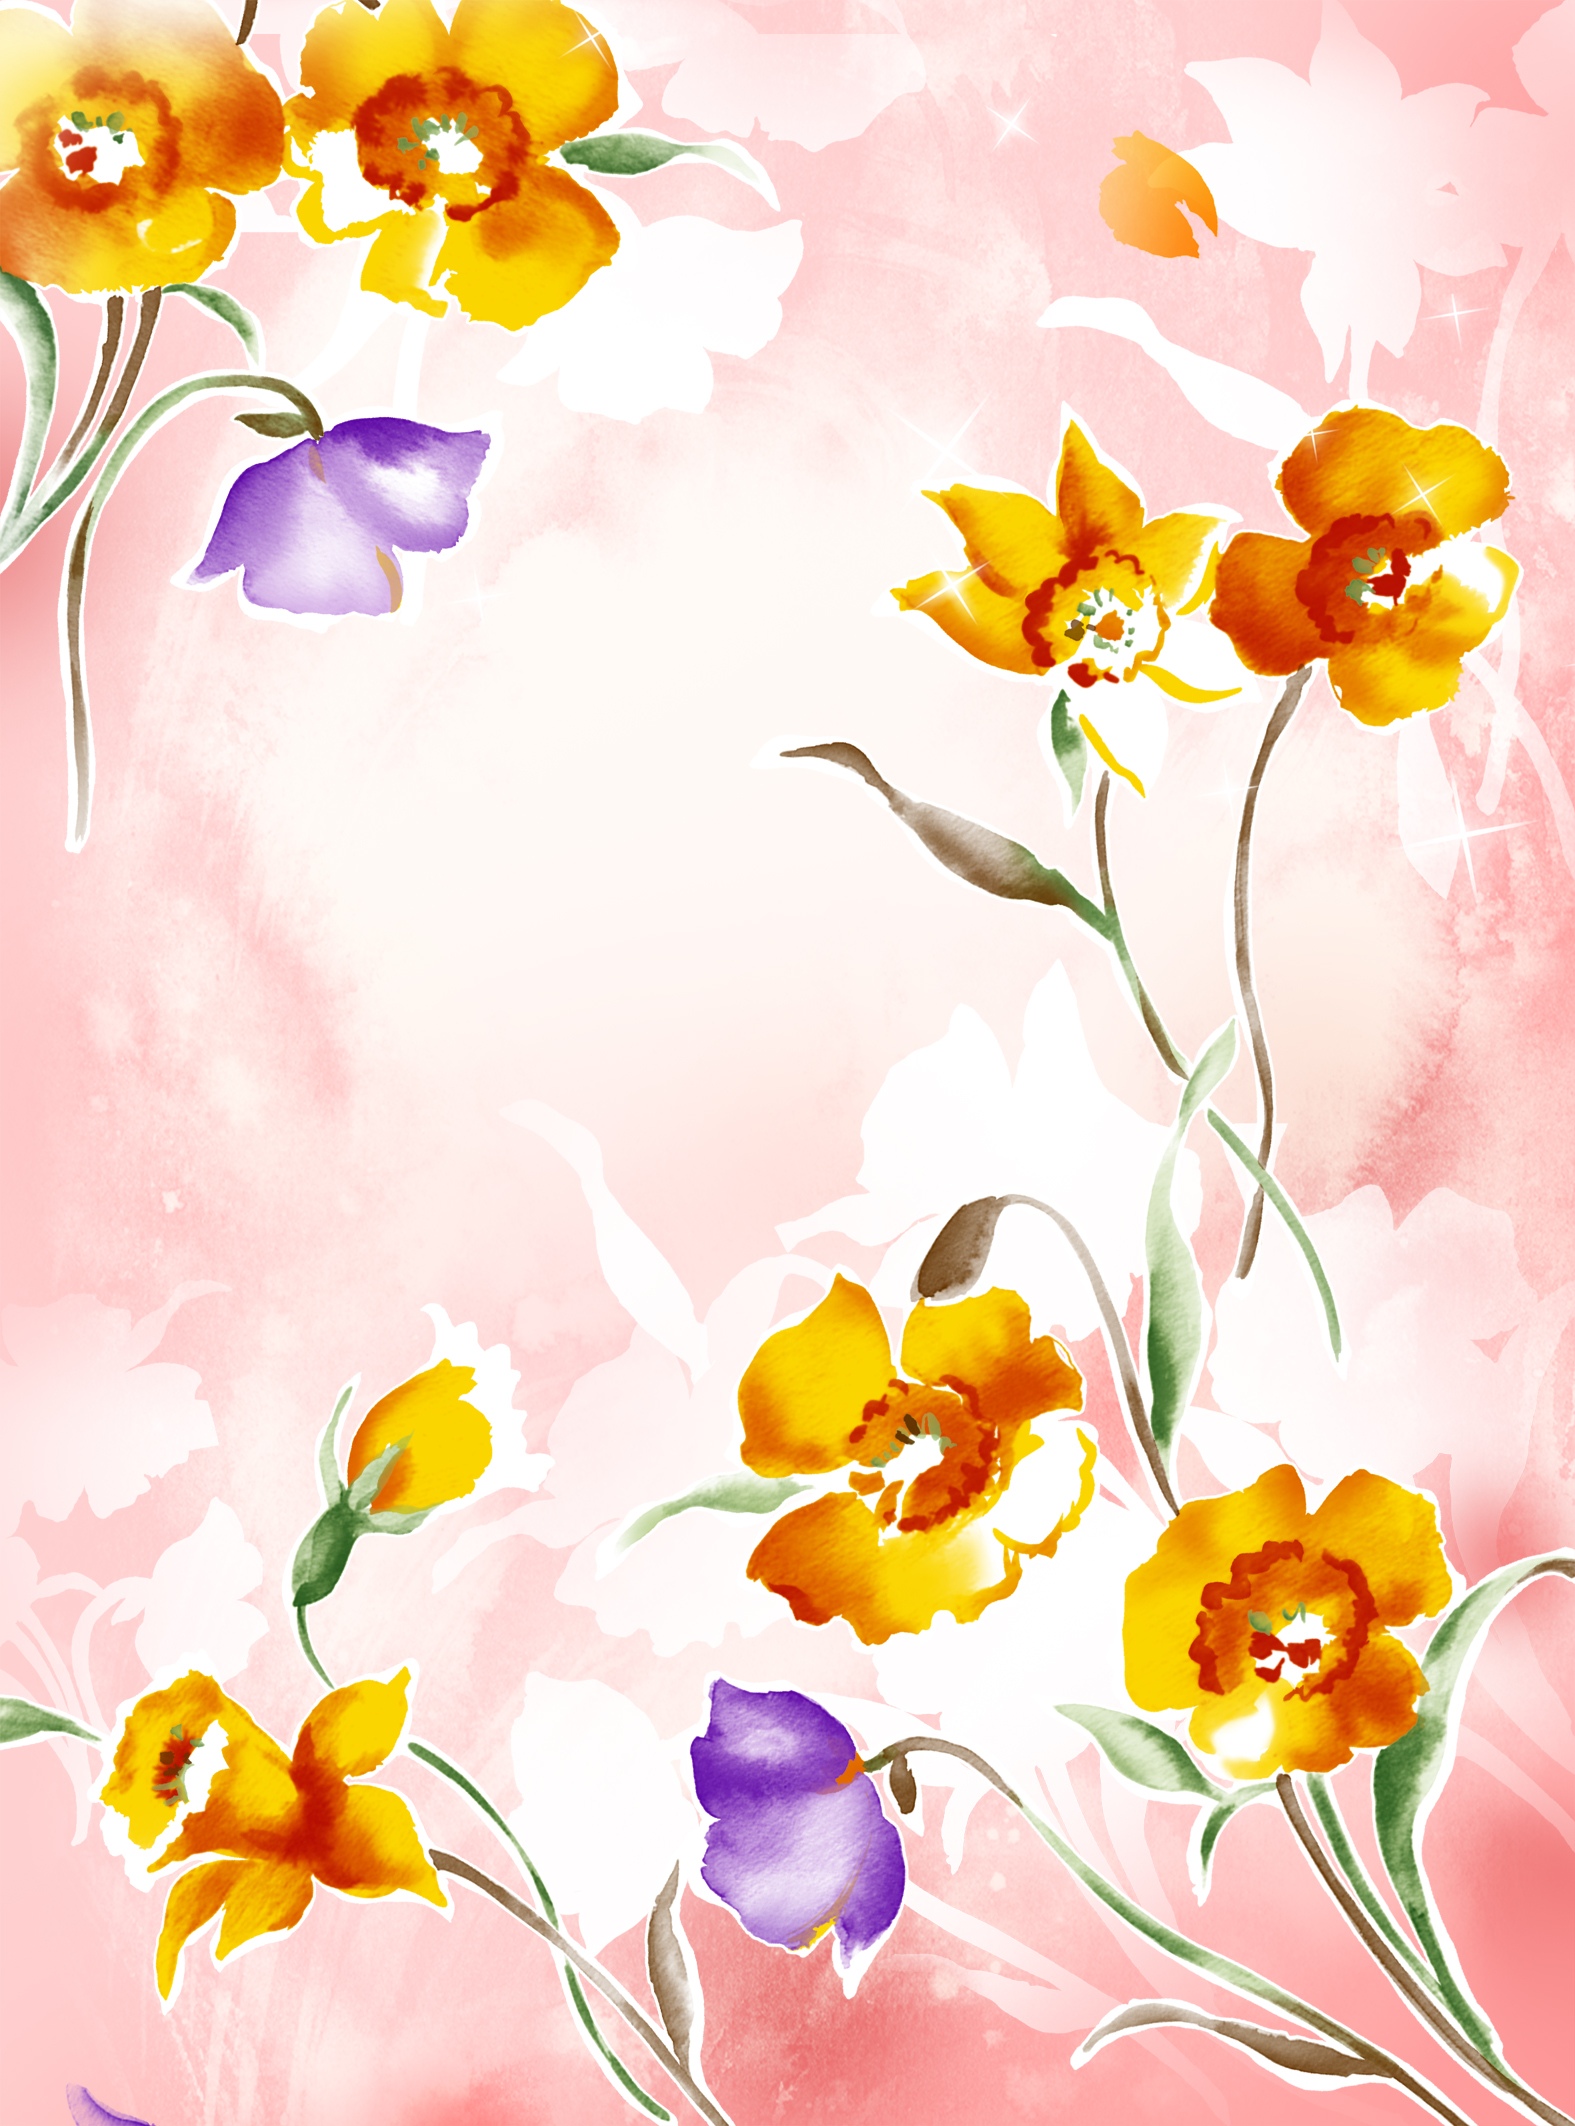 floral watercolor background psd